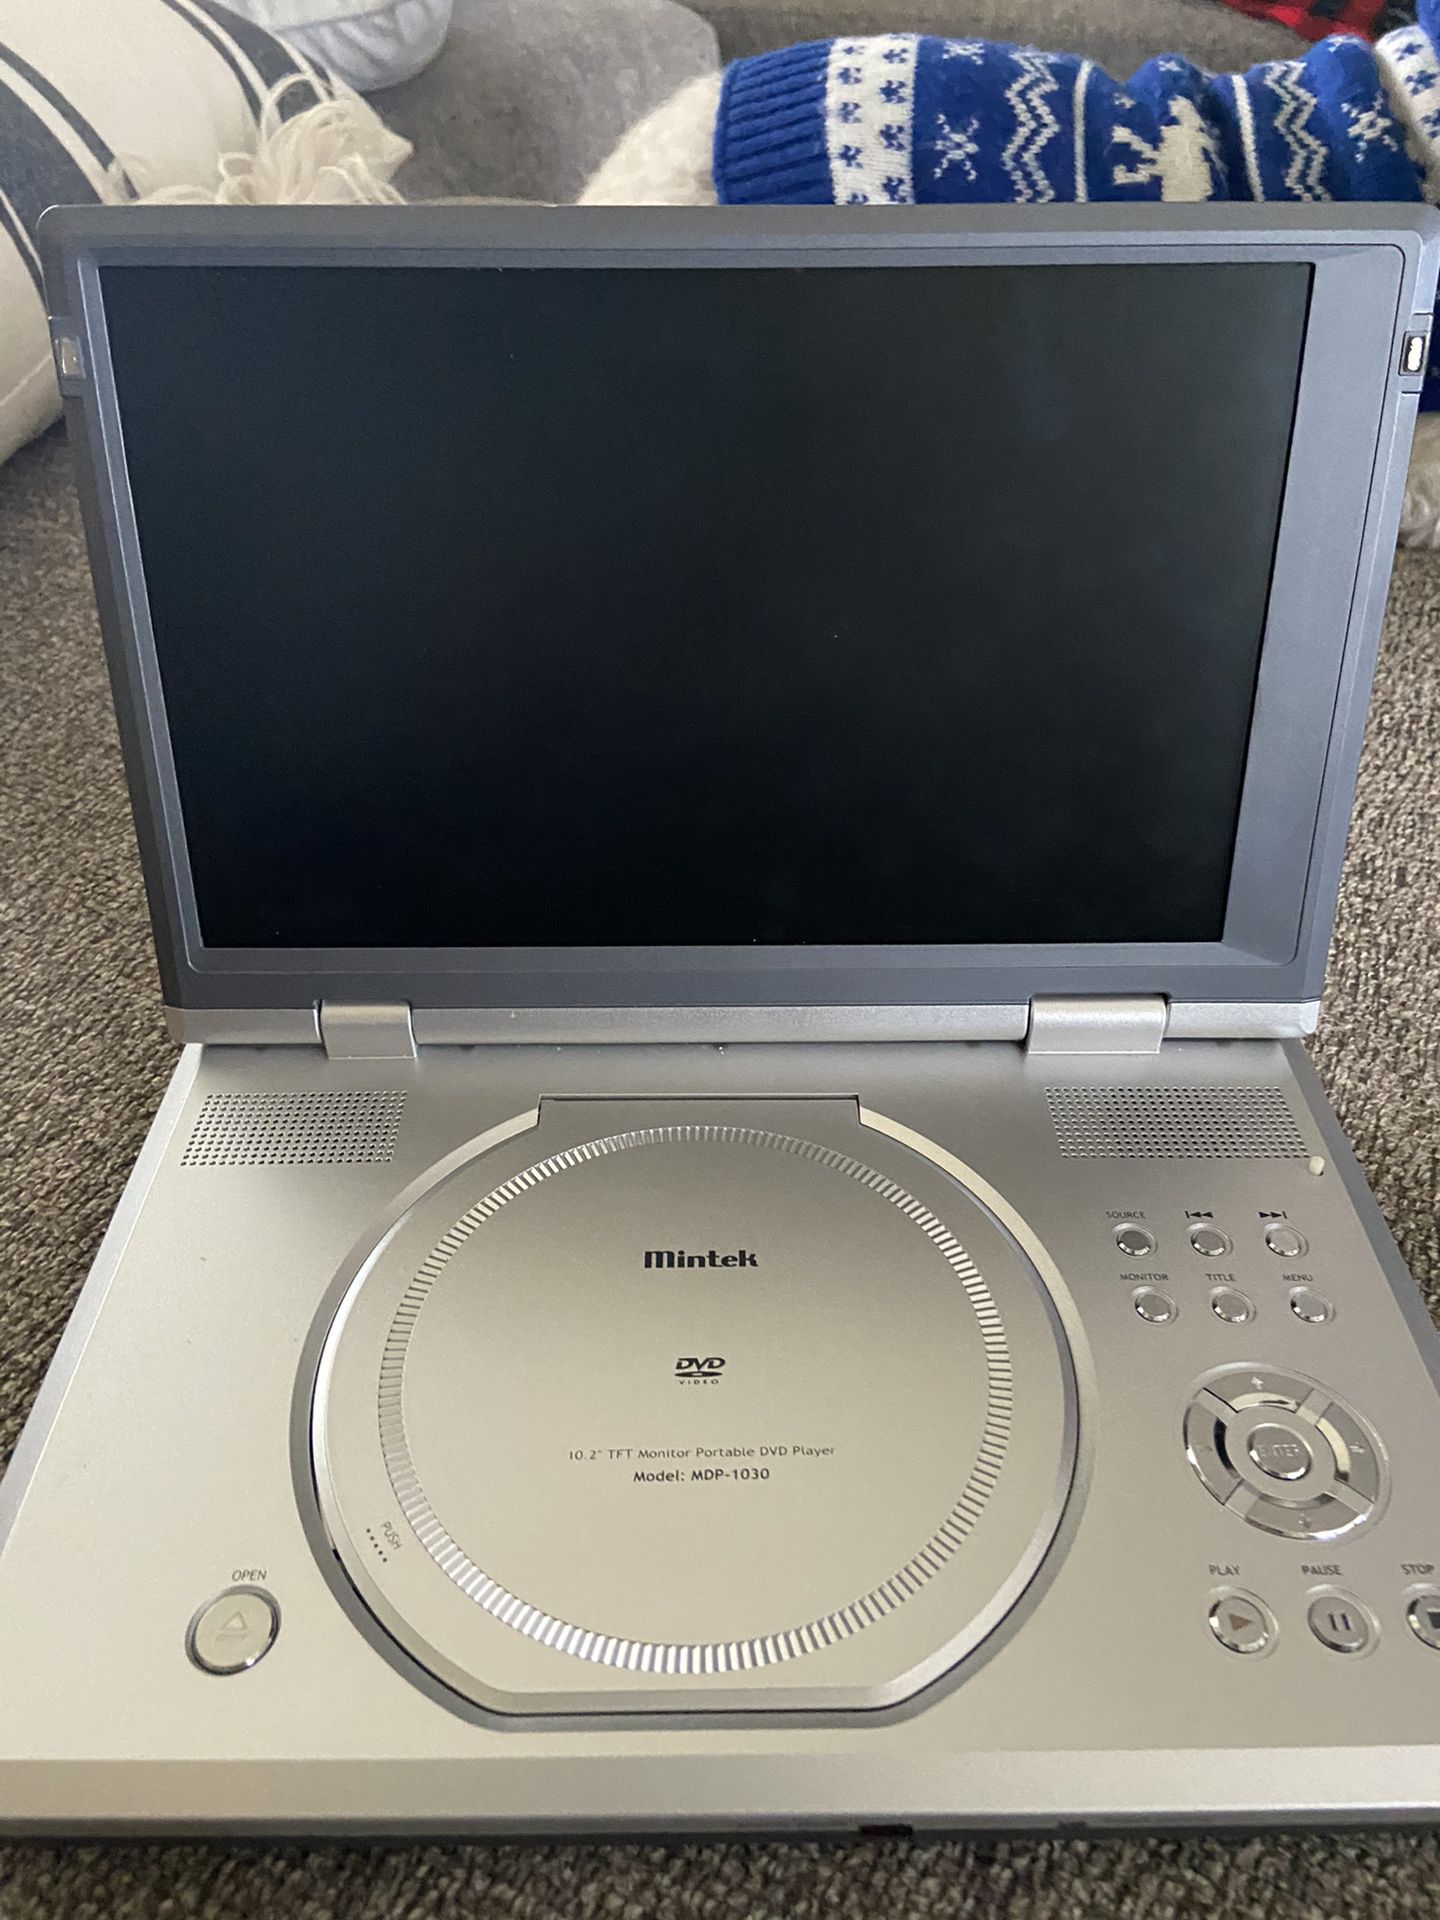 Portable DVD player 10.2 in screen Ways to headphone jacks and remote